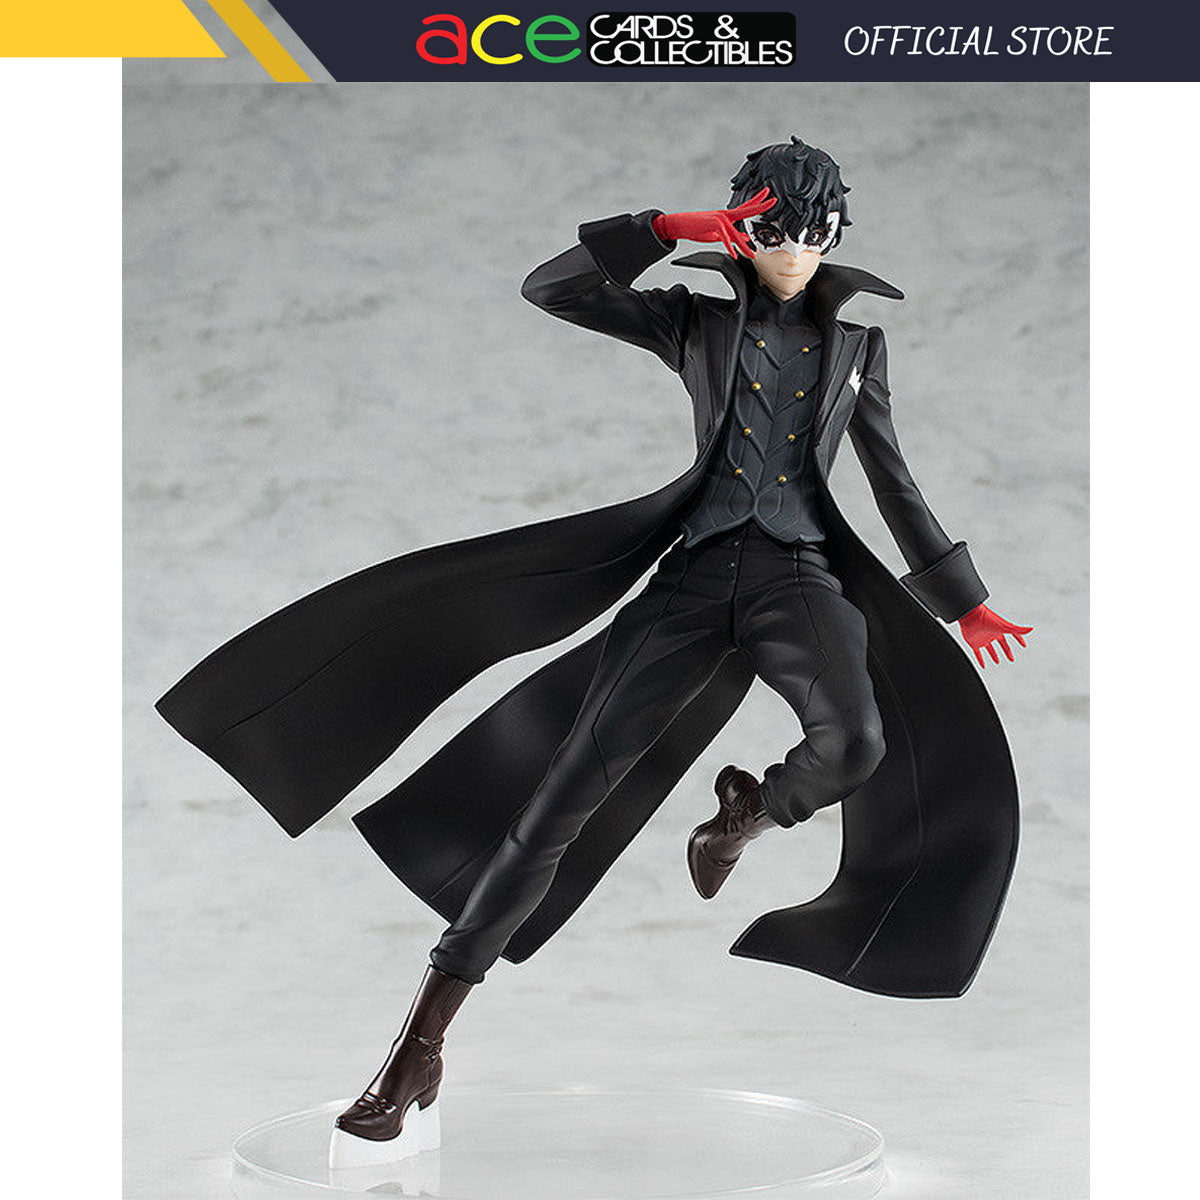 Persona 5 the Animation Pop Up Parade "Joker" (Reissue)-Good Smile Company-Ace Cards & Collectibles